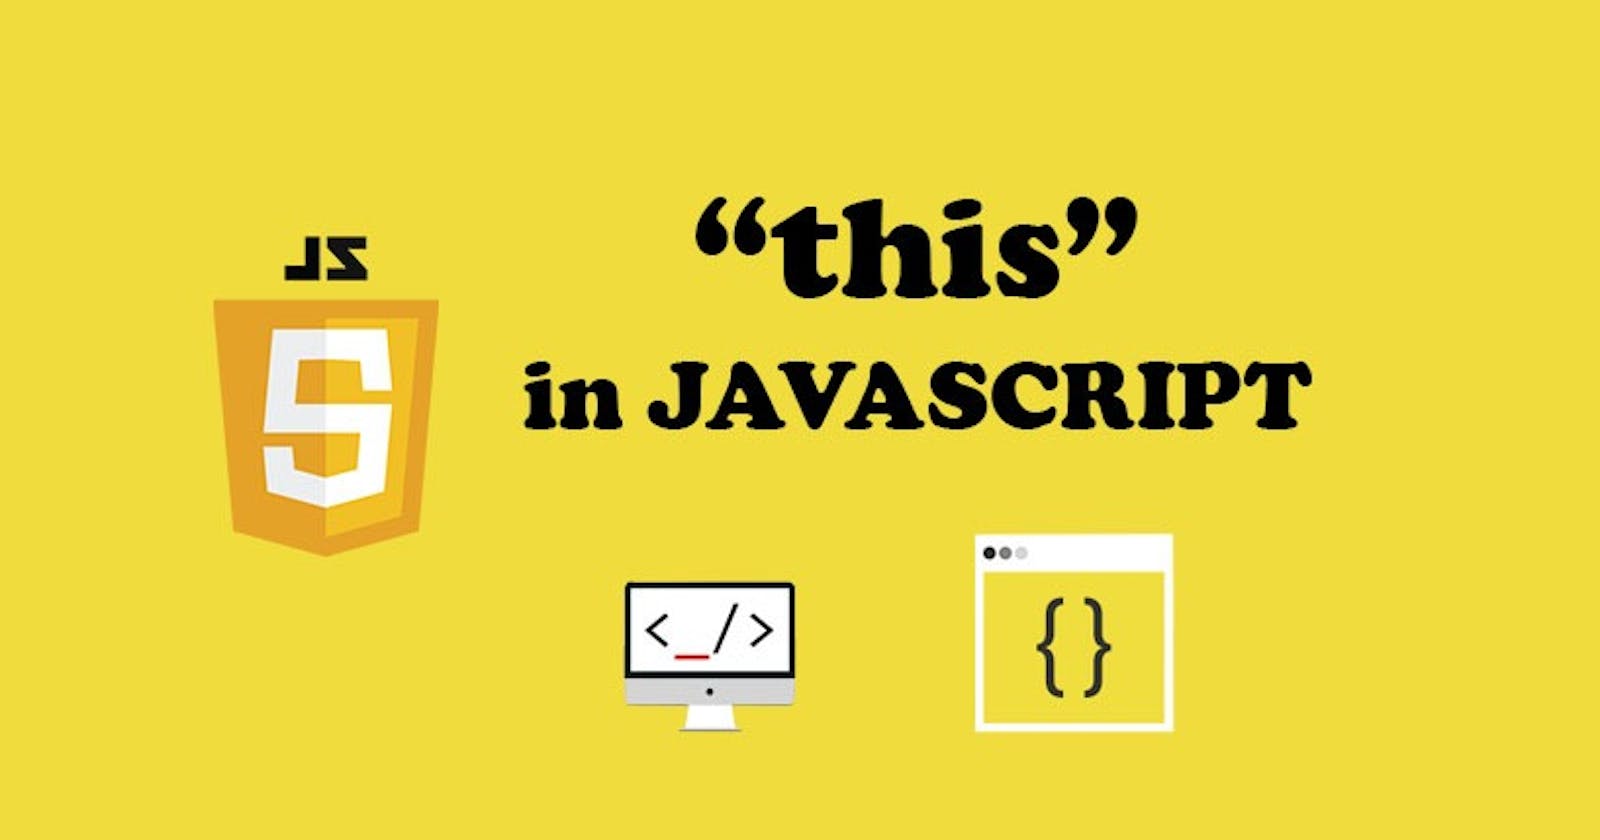 Value of 'this' in JavaScript